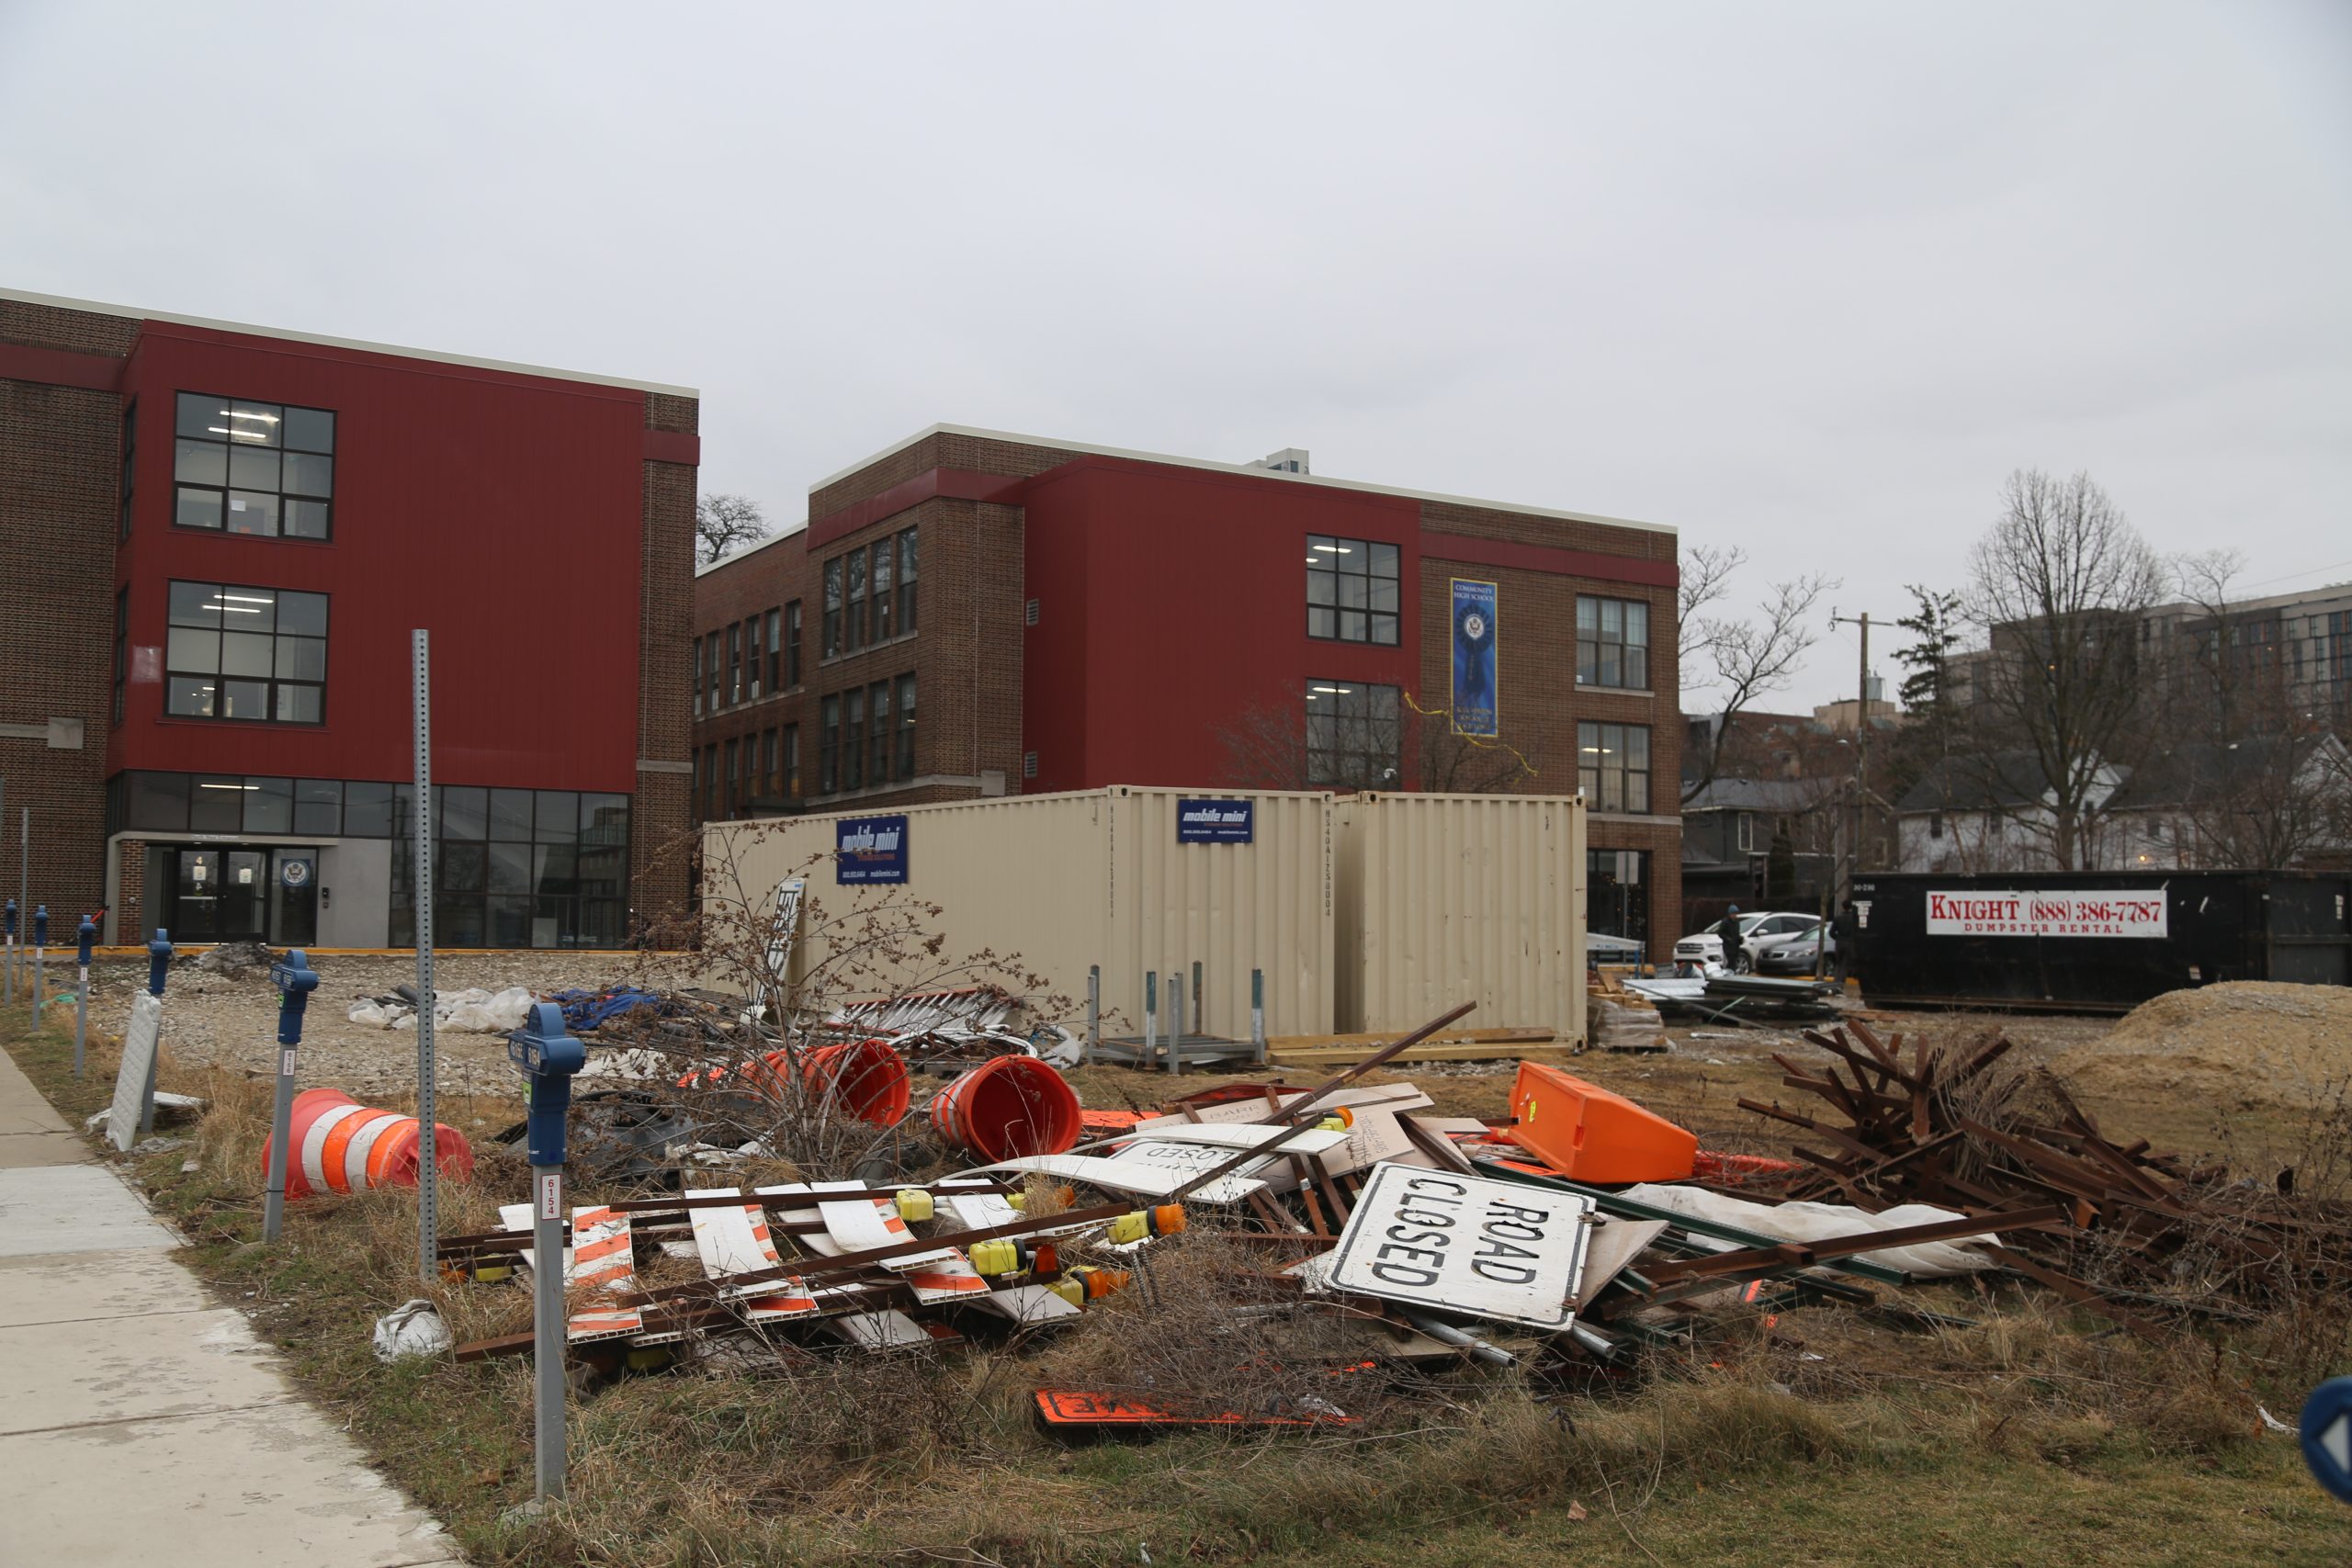 On Feb 17 the fences surrounding the construction site were taken down allowing students to walk through the lawn for the first time in three years.